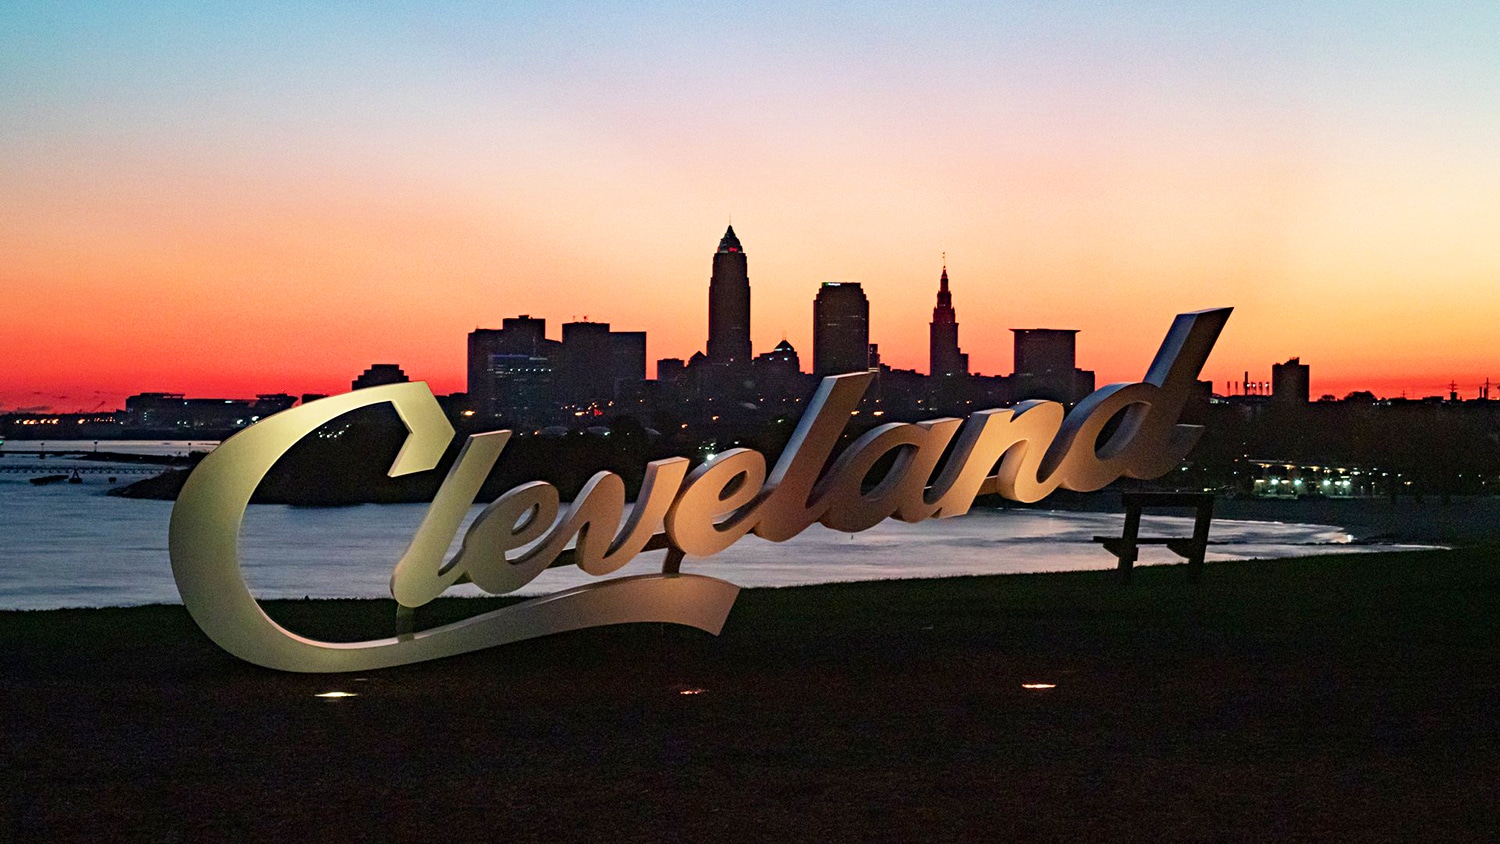 horizontal photo of a Cleveland Script Sign at sunset